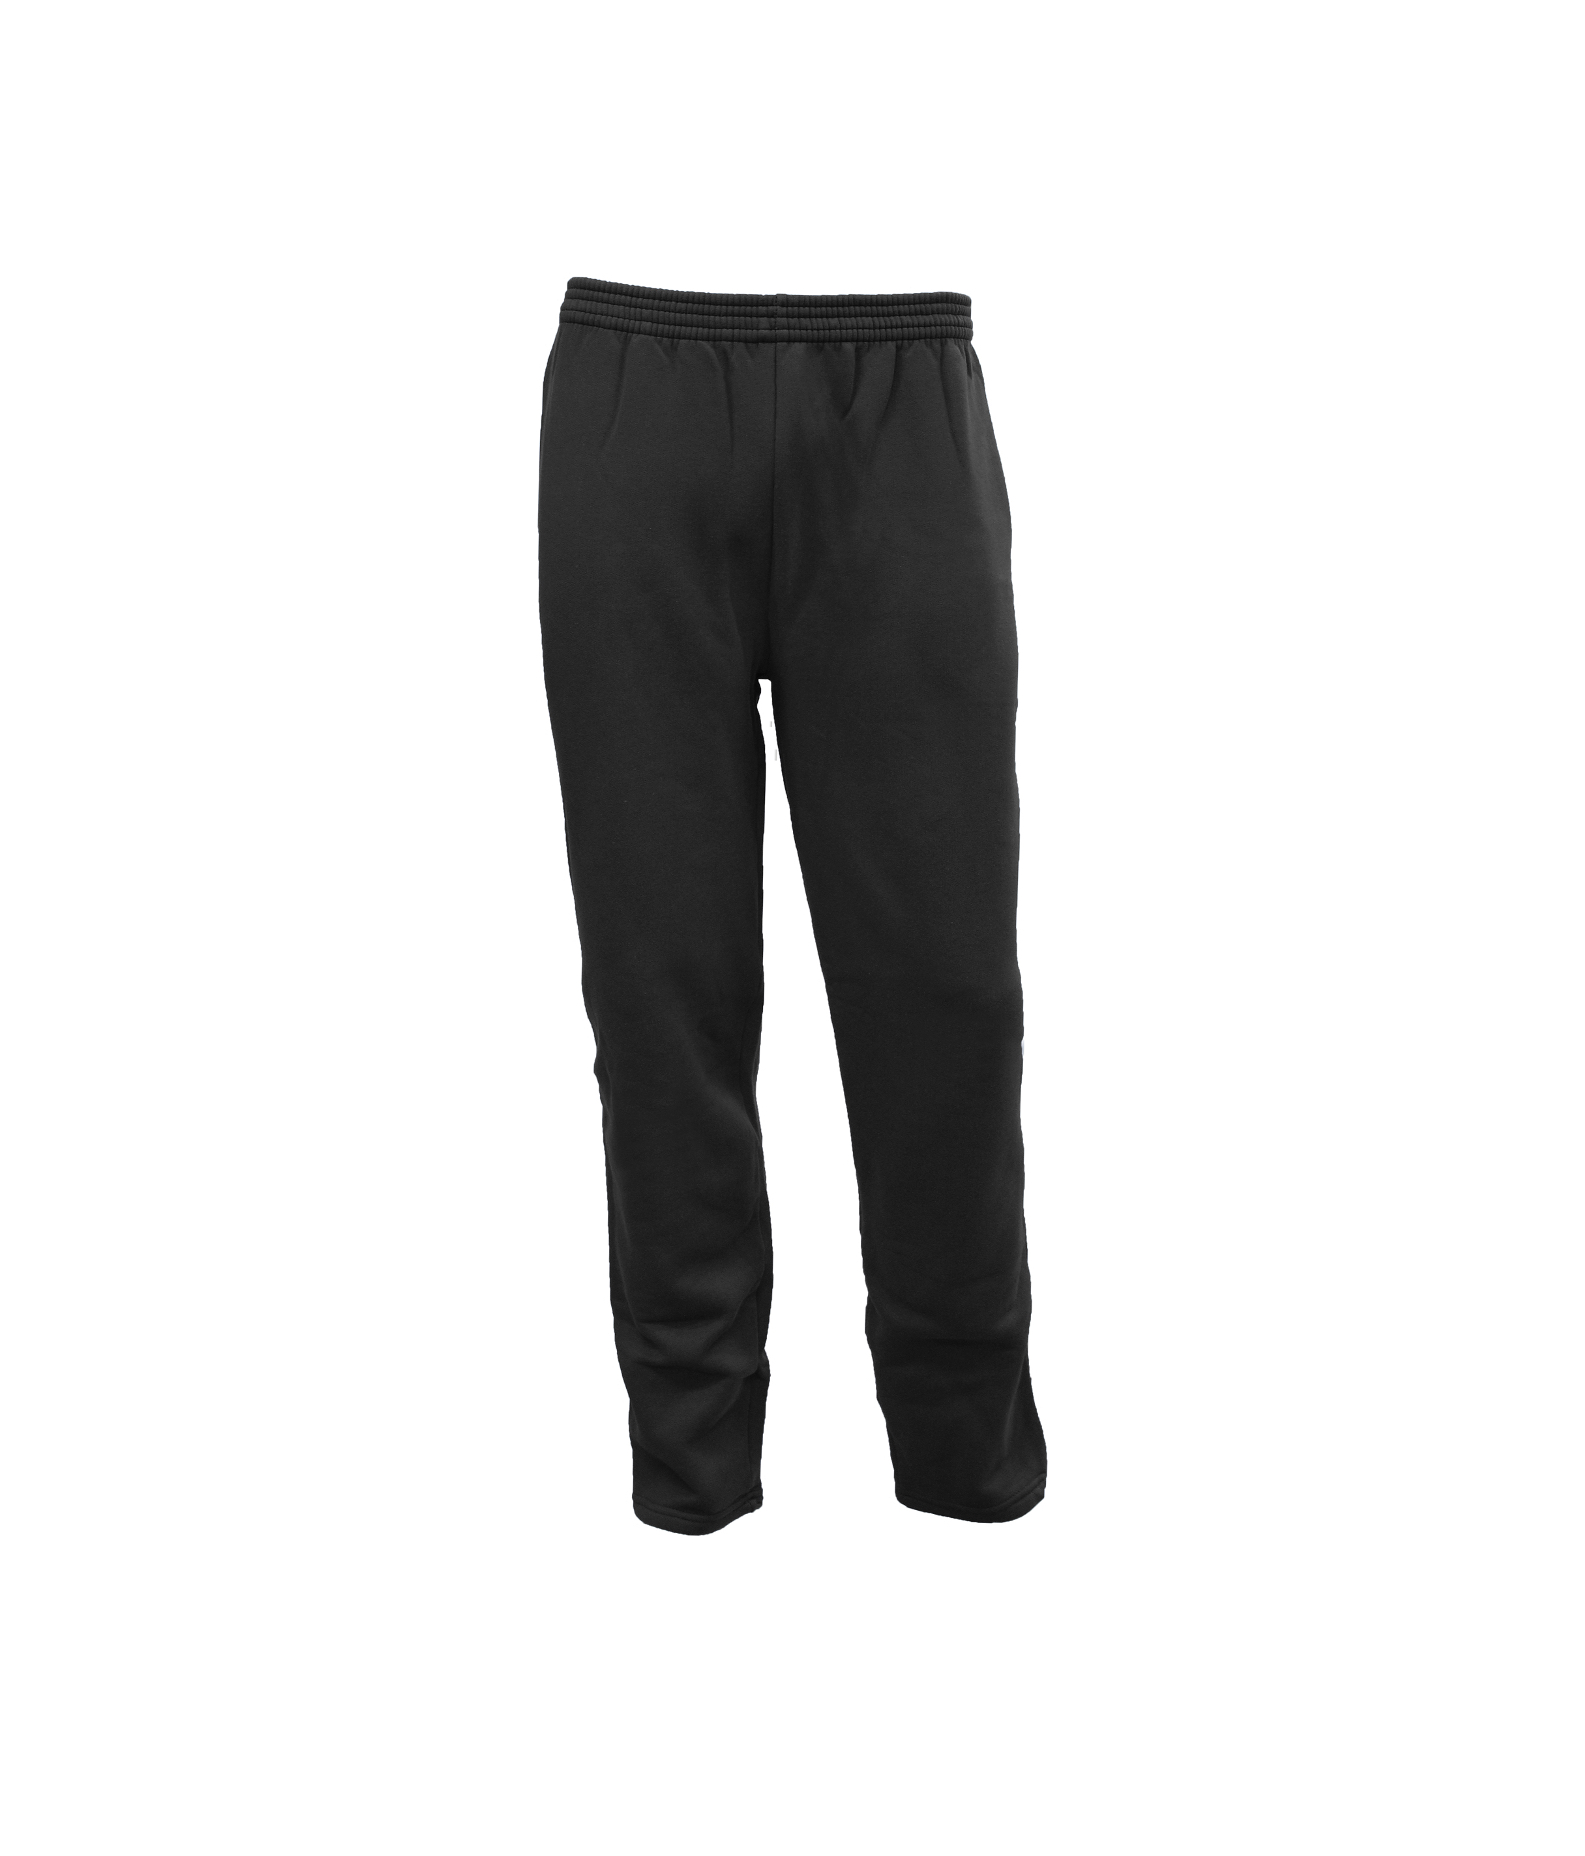 Black Tracksuit Bottoms (Non-Cuff 2602) - Quality Schoolwear